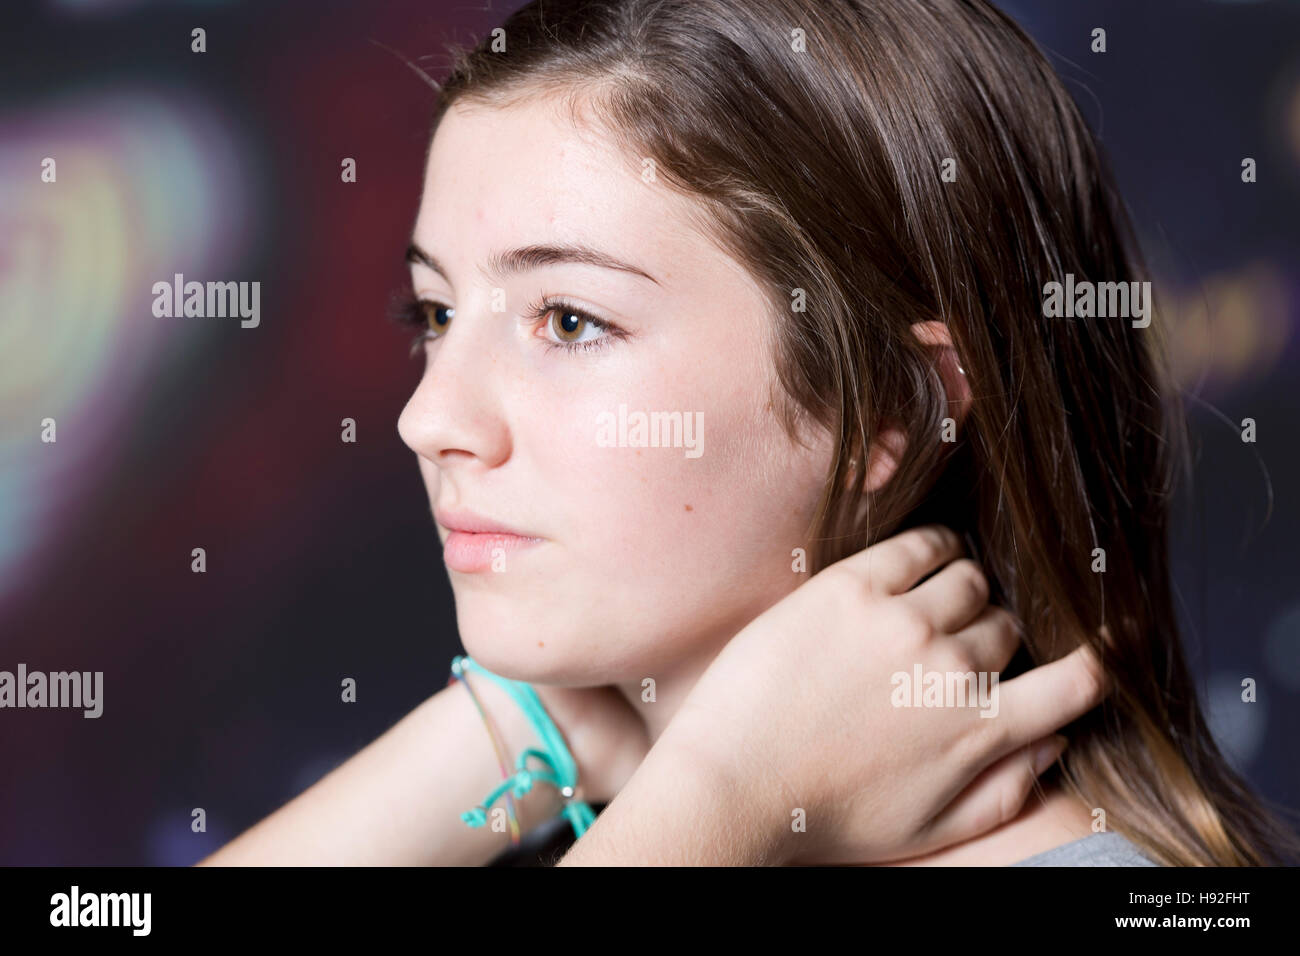 Portrait of adolescent touching hair, lit with flax of study abroad at night. Stock Photo